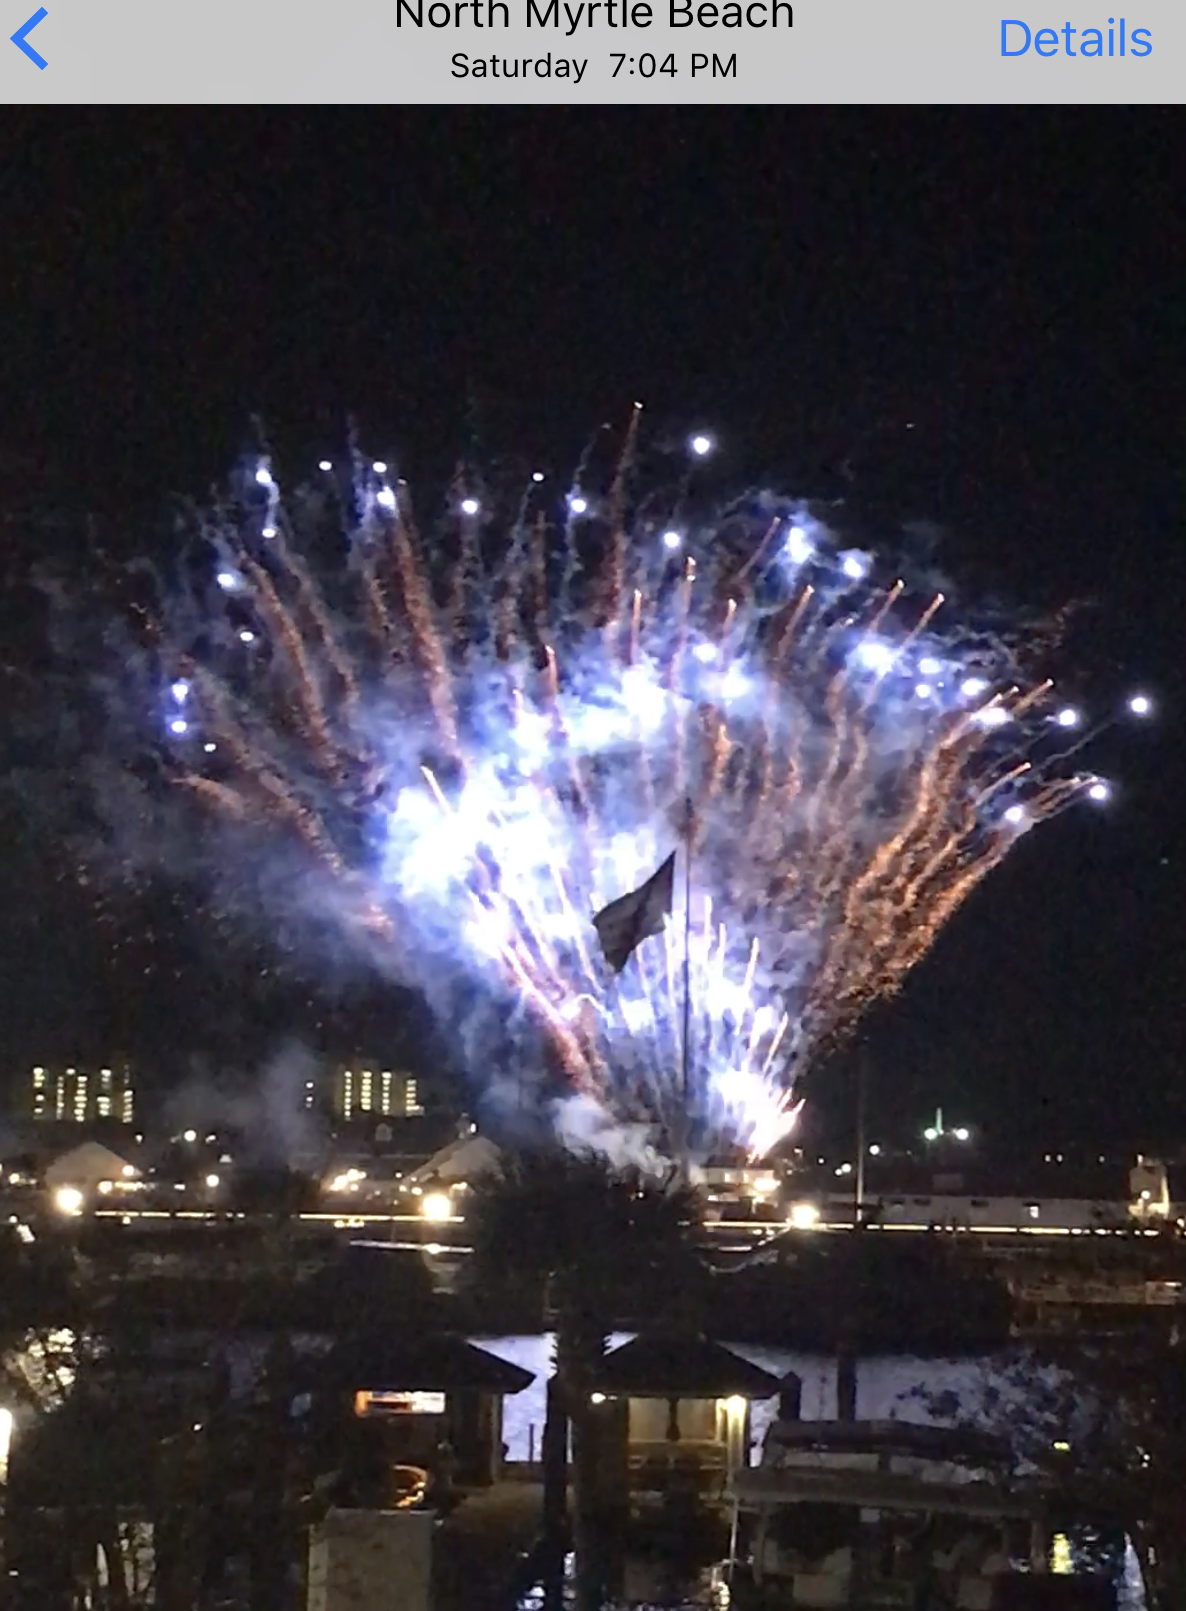 Fireworks at the Barefoot Marina, Myrtle Beach, SC